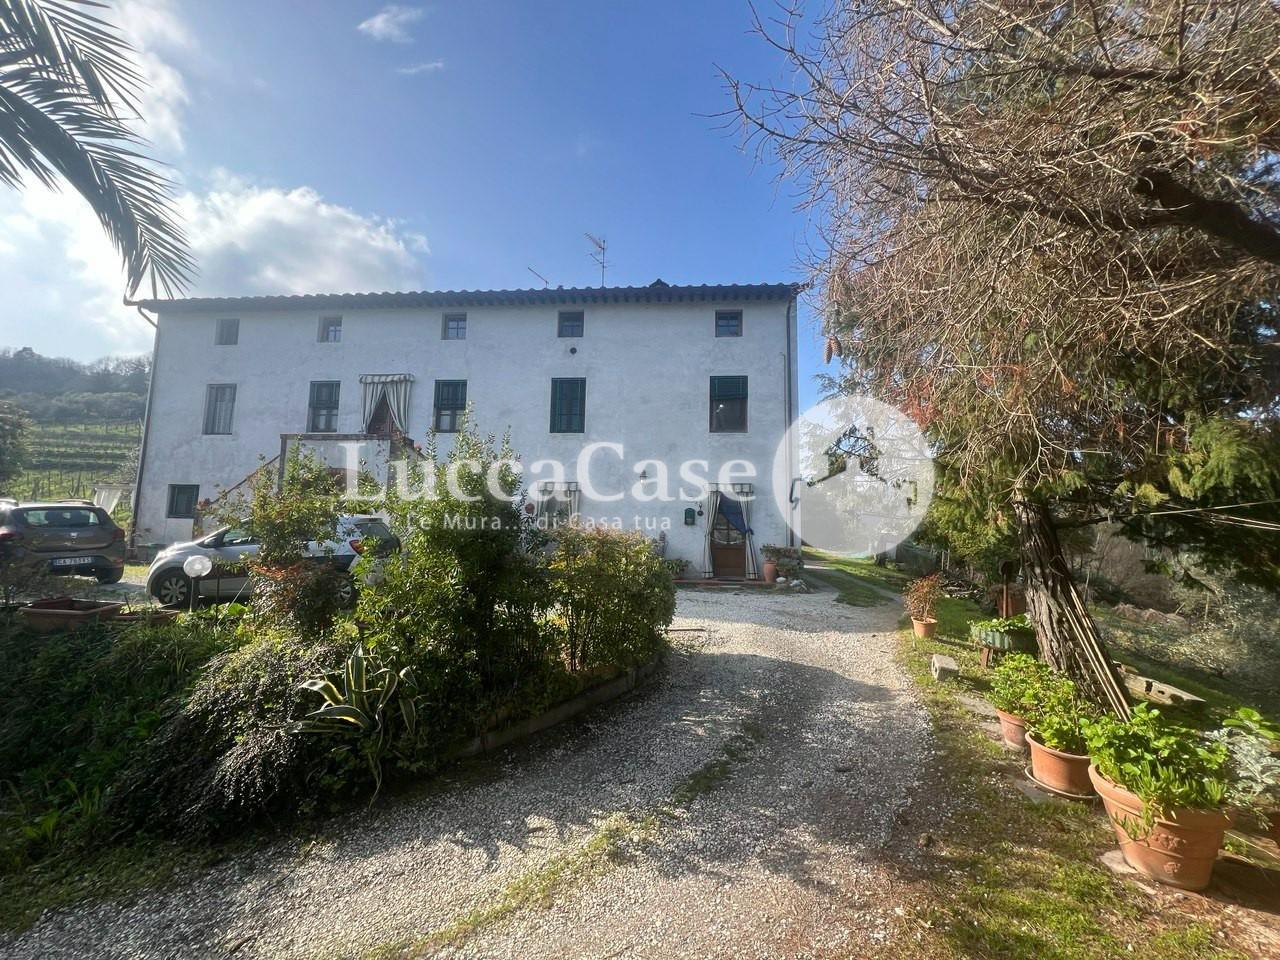 Country house for sale in Lucca